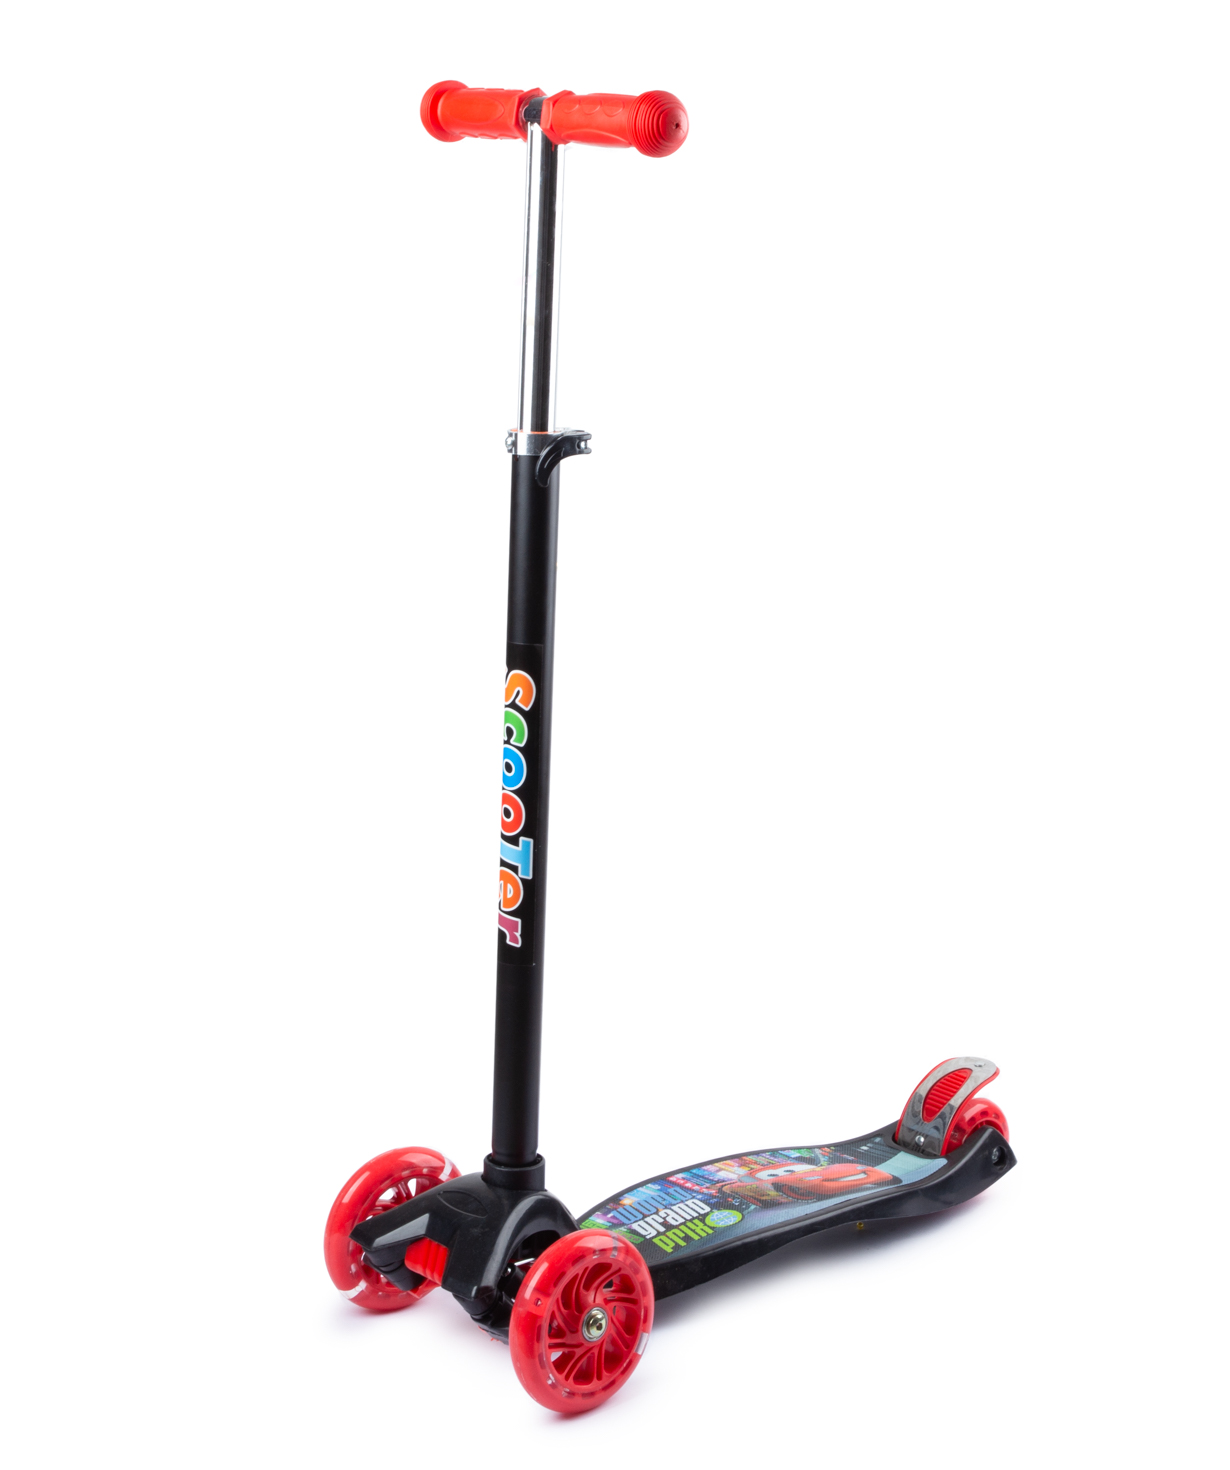 Scooter PE-9915 with light effect